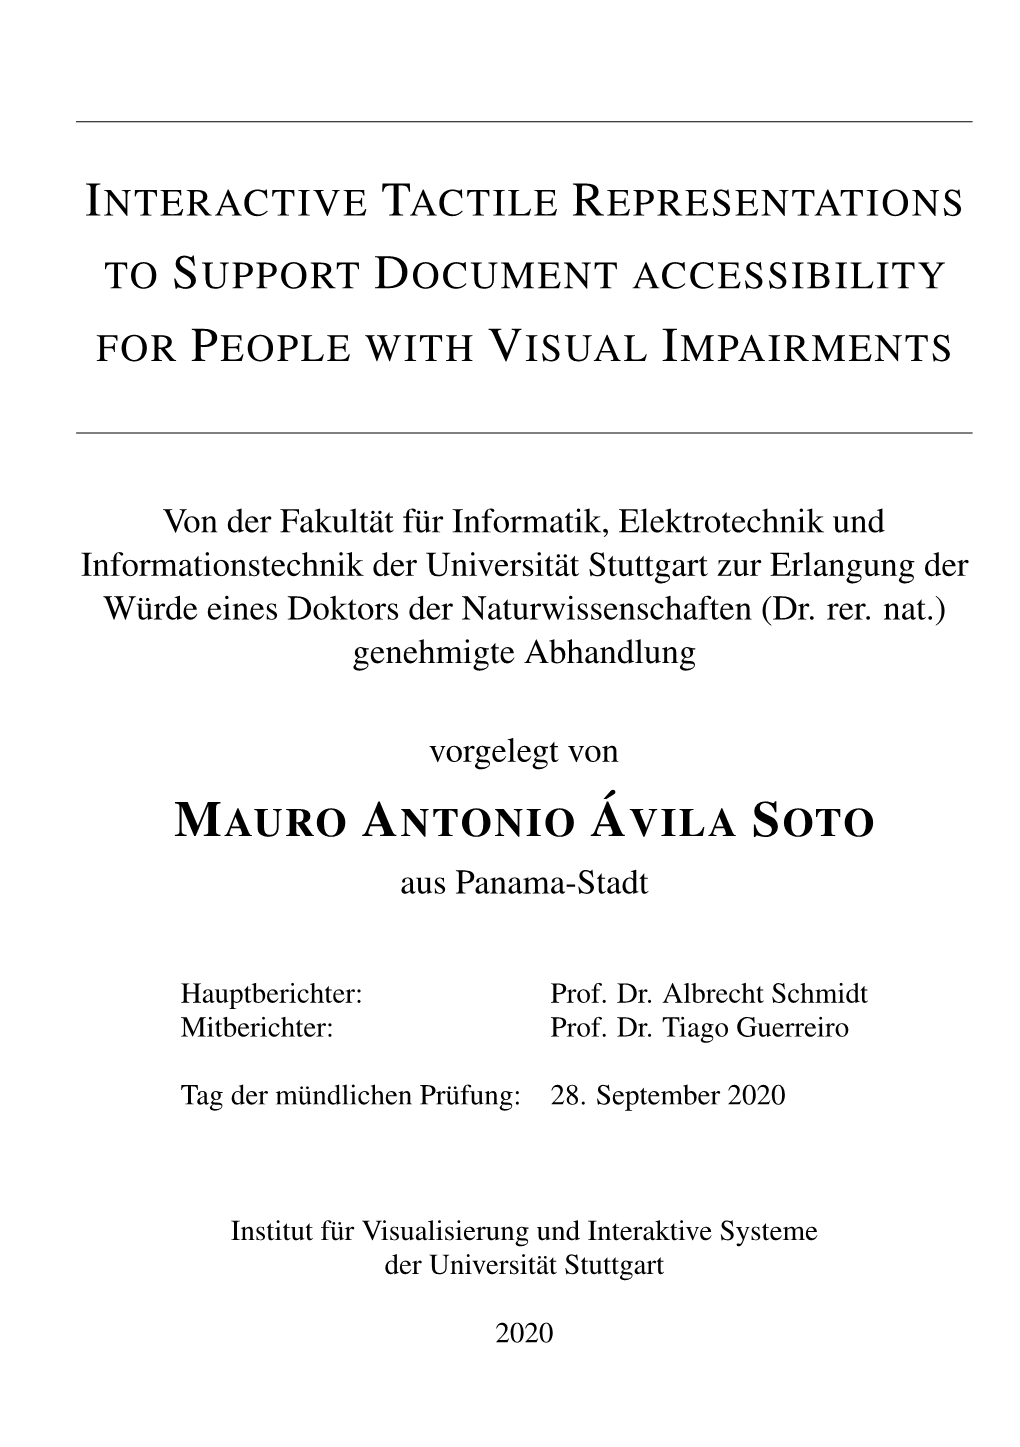 Interactive Tactile Representations to Support Document Accessibility for People with Visual Impairments